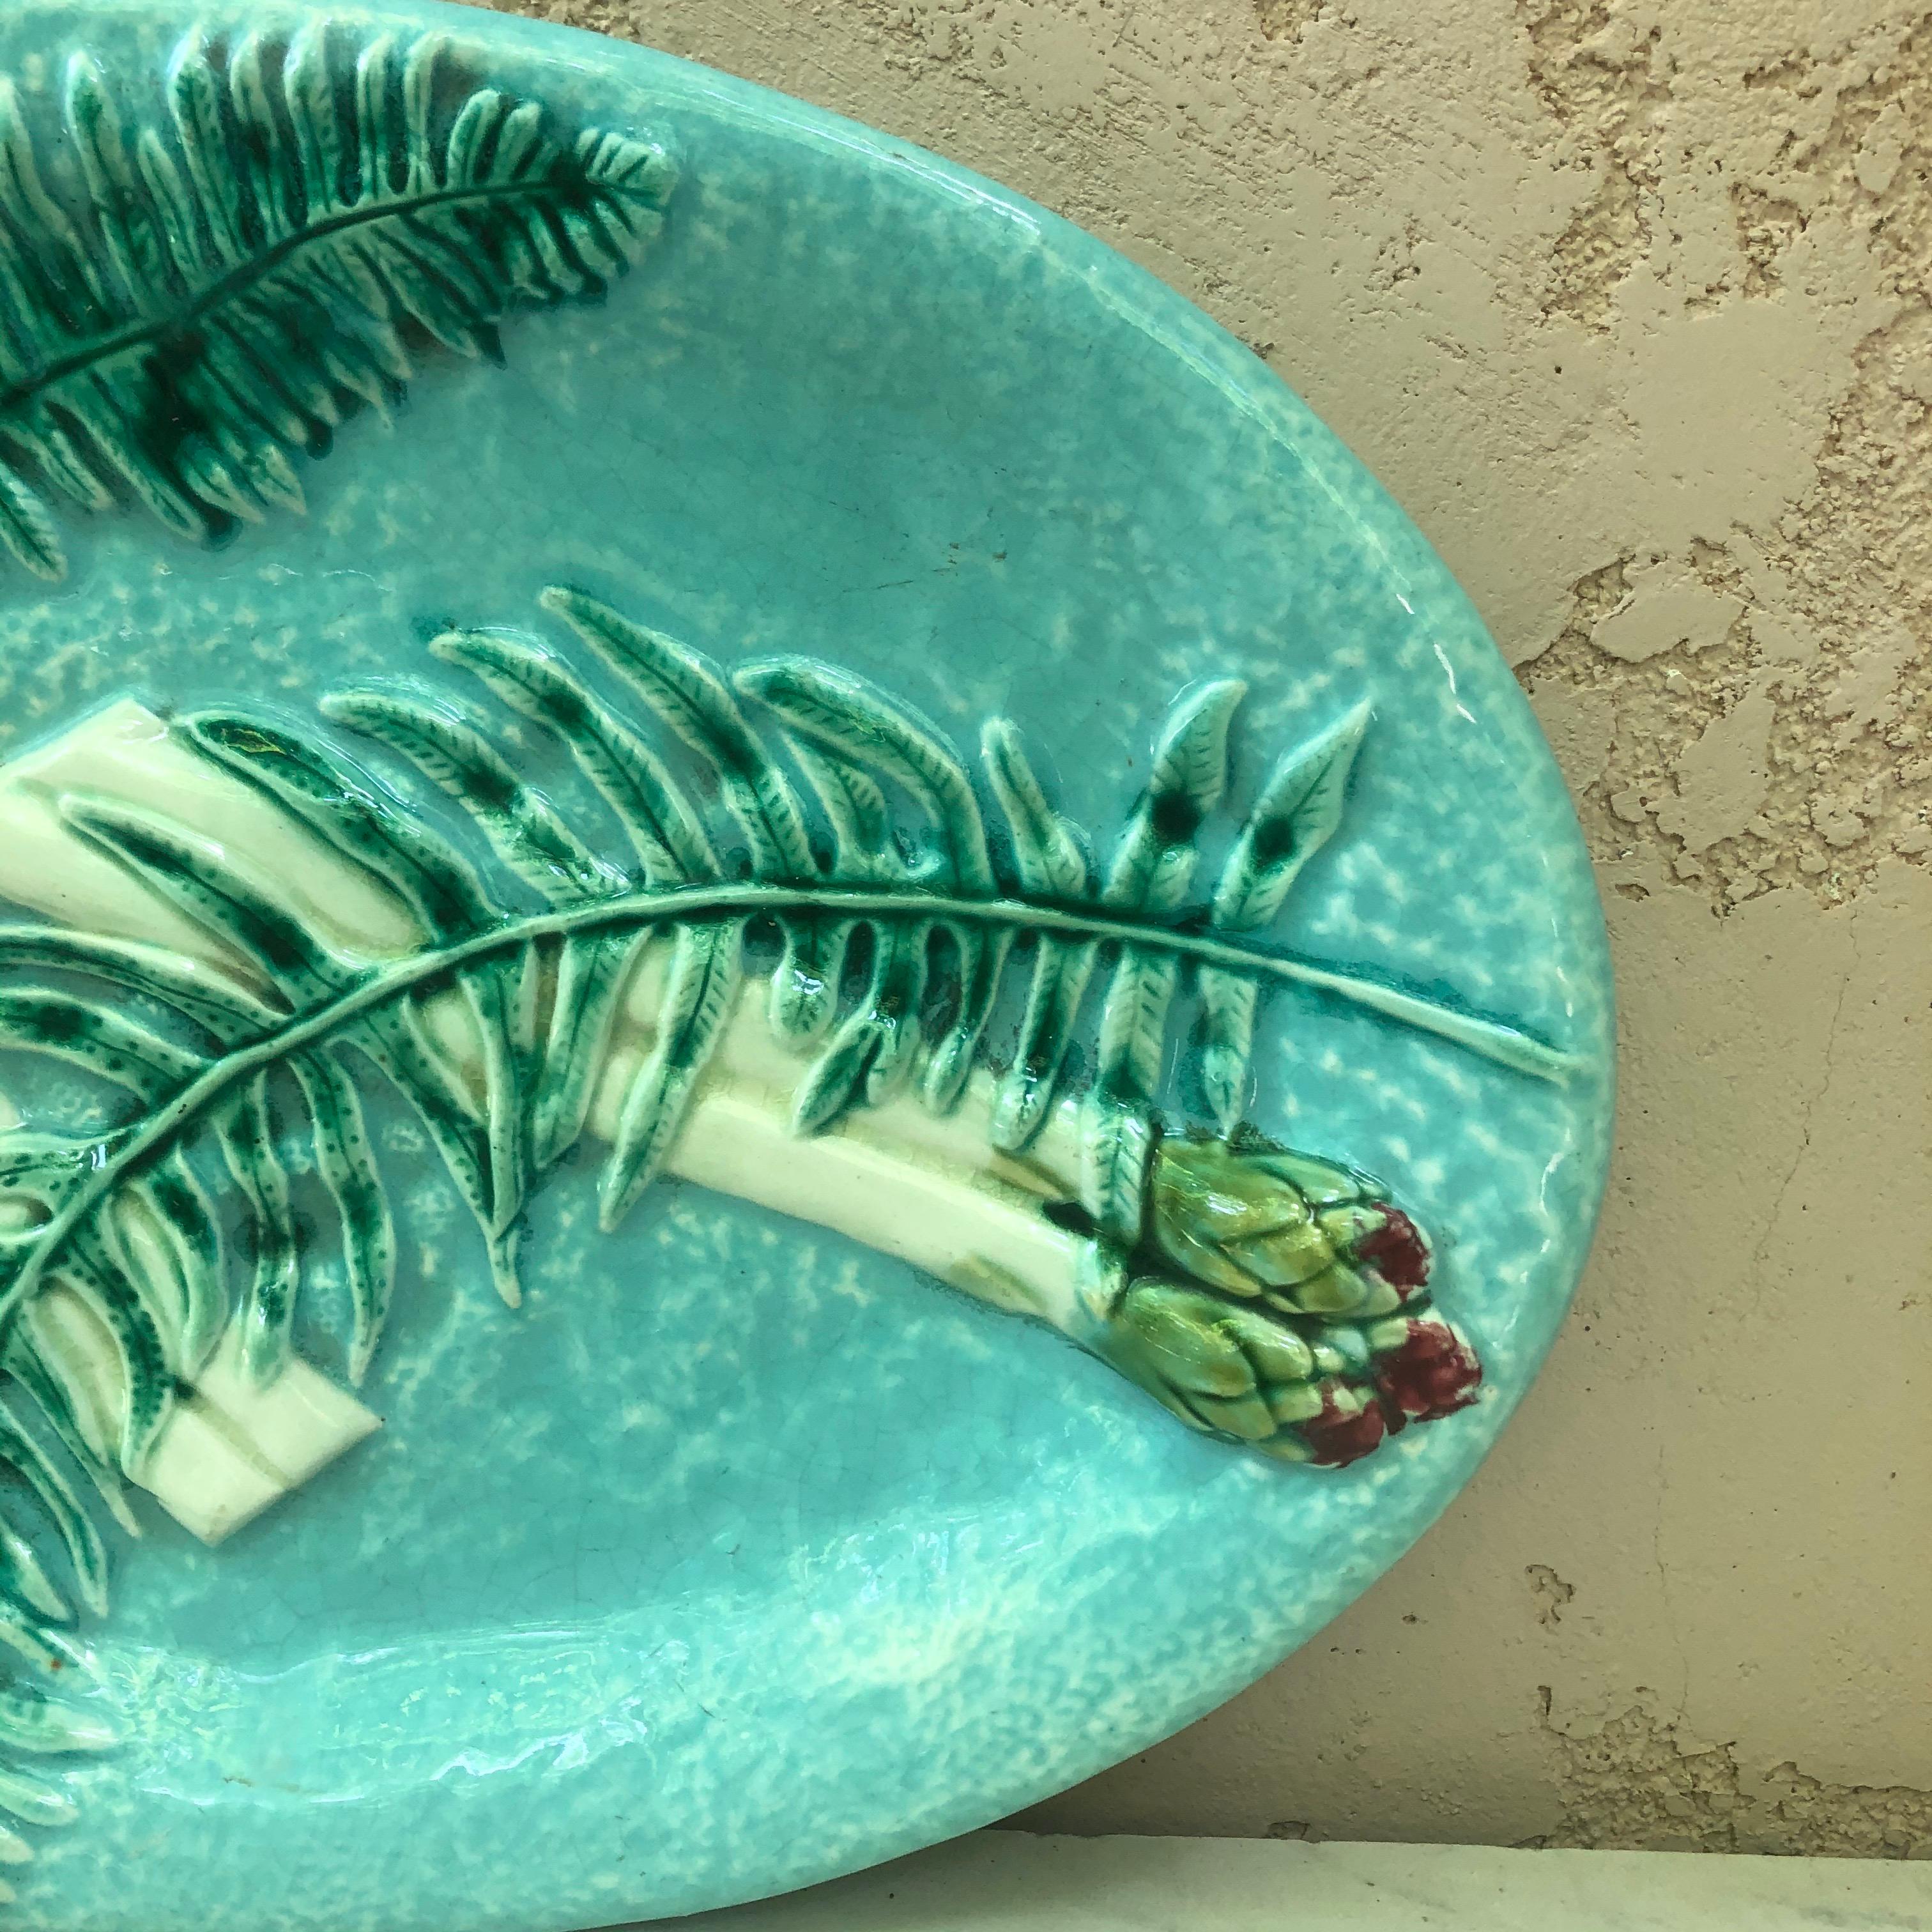 Rare Majolica Asparagus Platter with Fern Clairefontaine, circa 1880 In Good Condition For Sale In Austin, TX